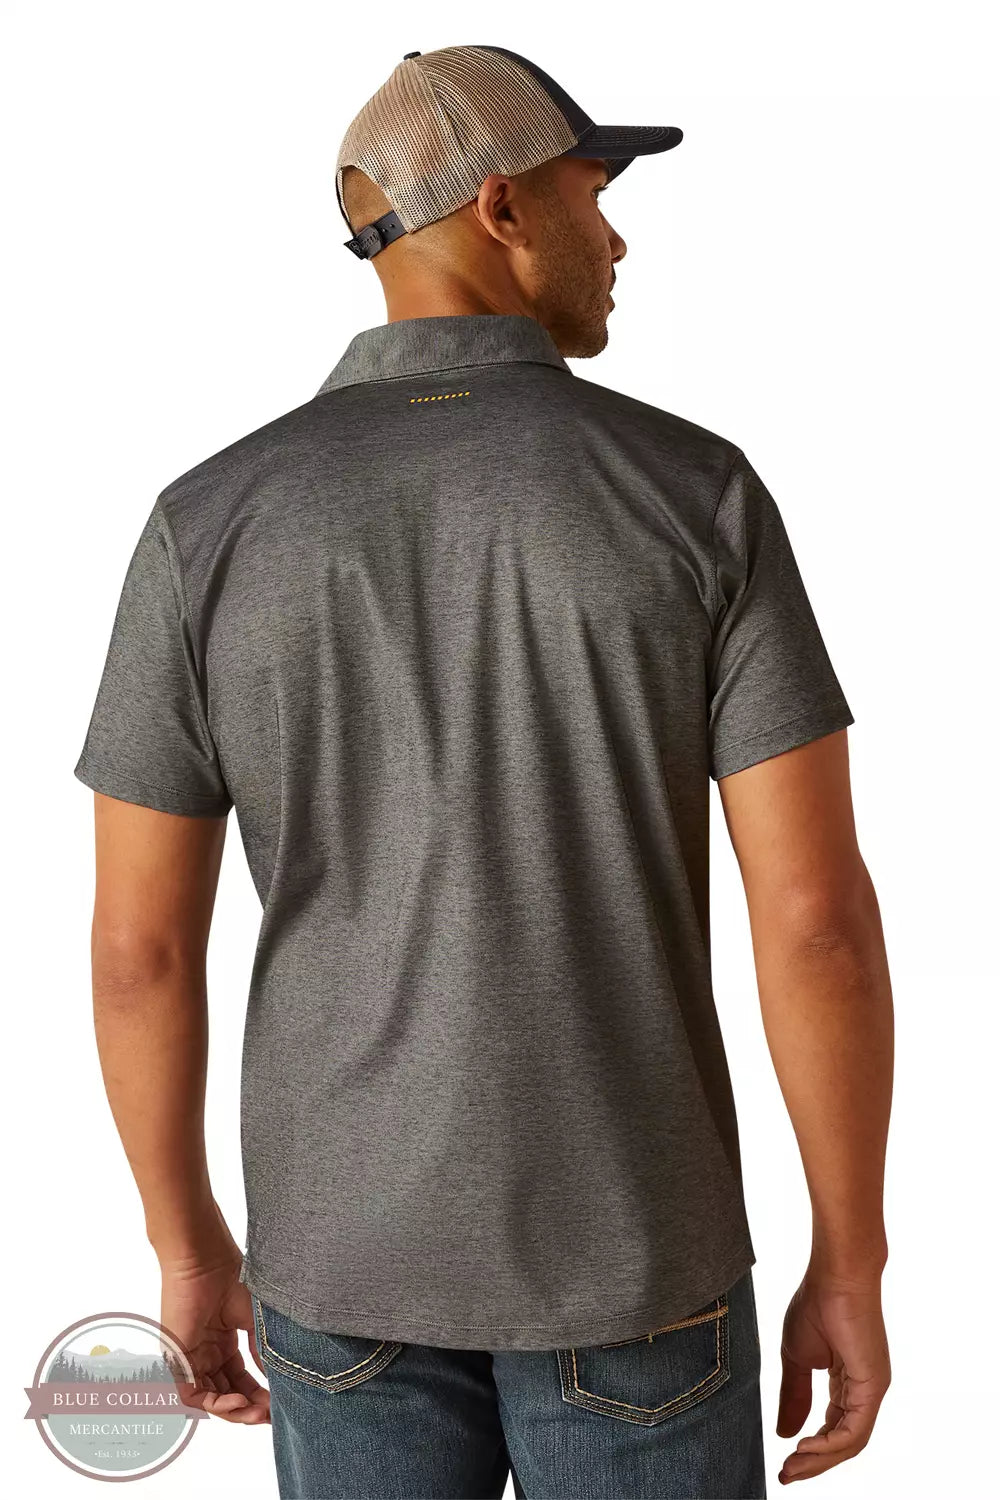 Ariat 10048617 Rebar Foreman Short Sleeve Polo Shirt in Charcoal Heather Back View